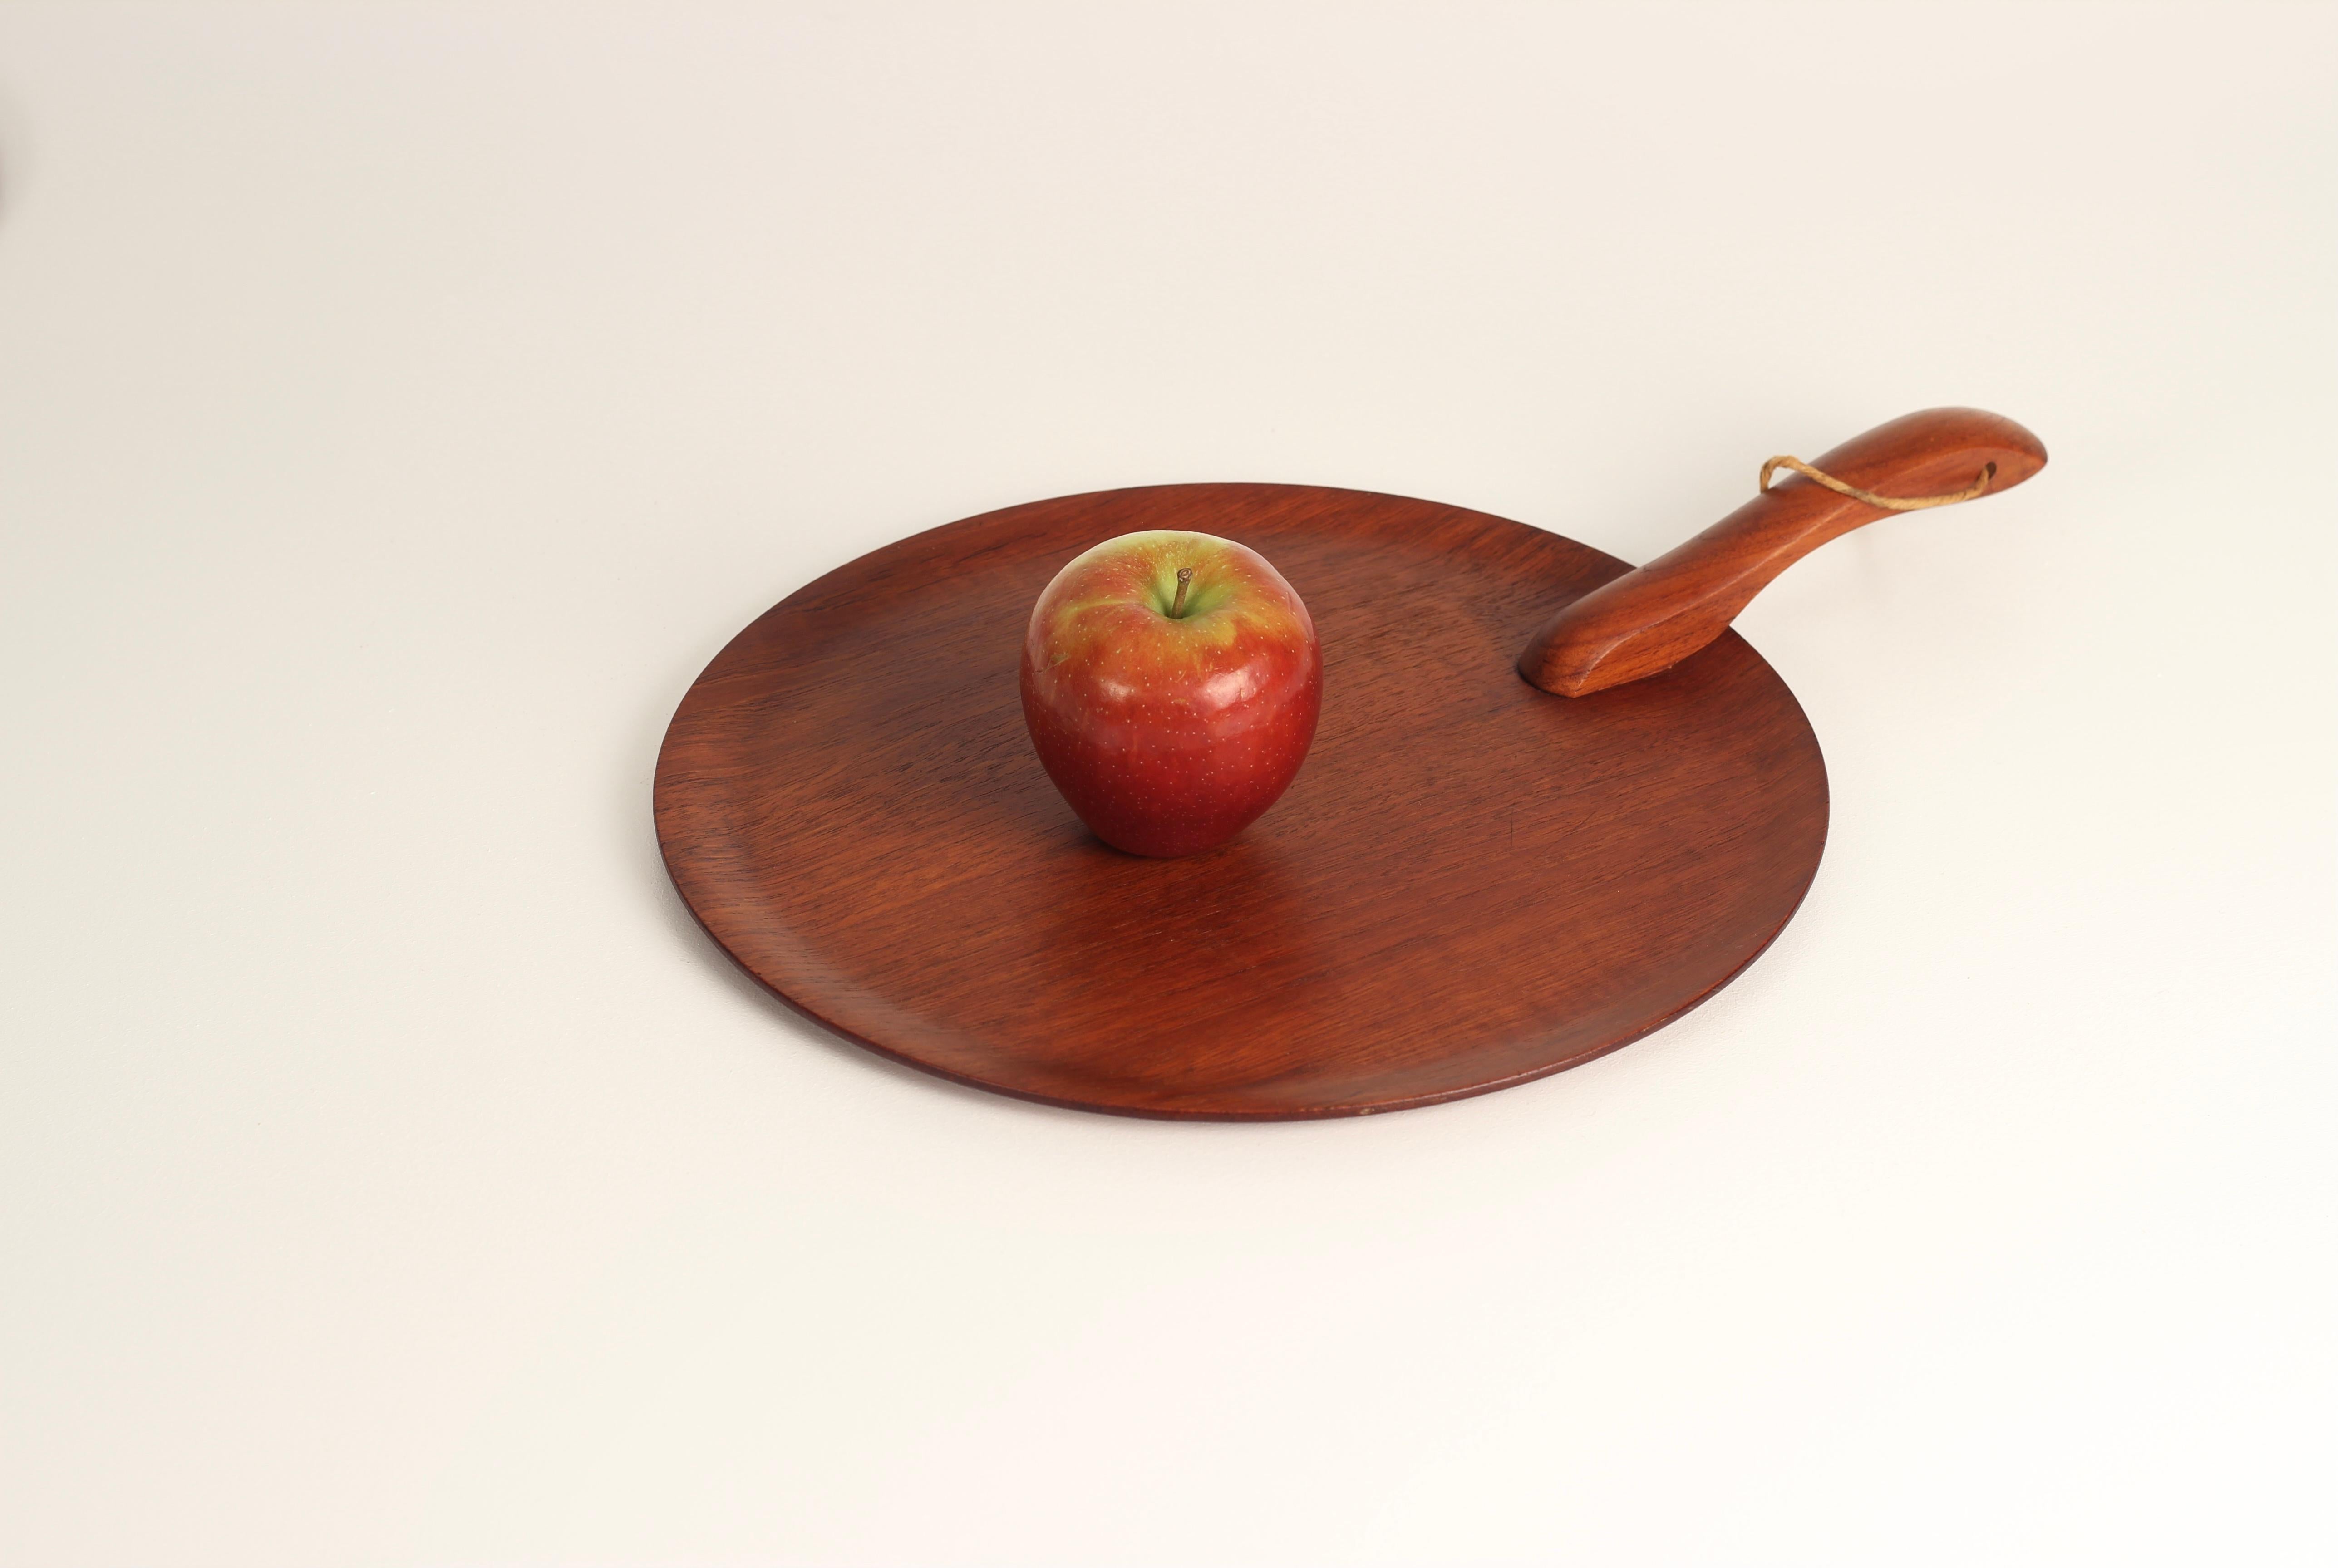 A Danish Mid-Century Modern Scandinavian design serving platter or cheese board in the style of Kay Bojesen. A sleekly designed handle with a hole for a strap to hang, glides over the top of a steam bent circular plate with profiled edges.